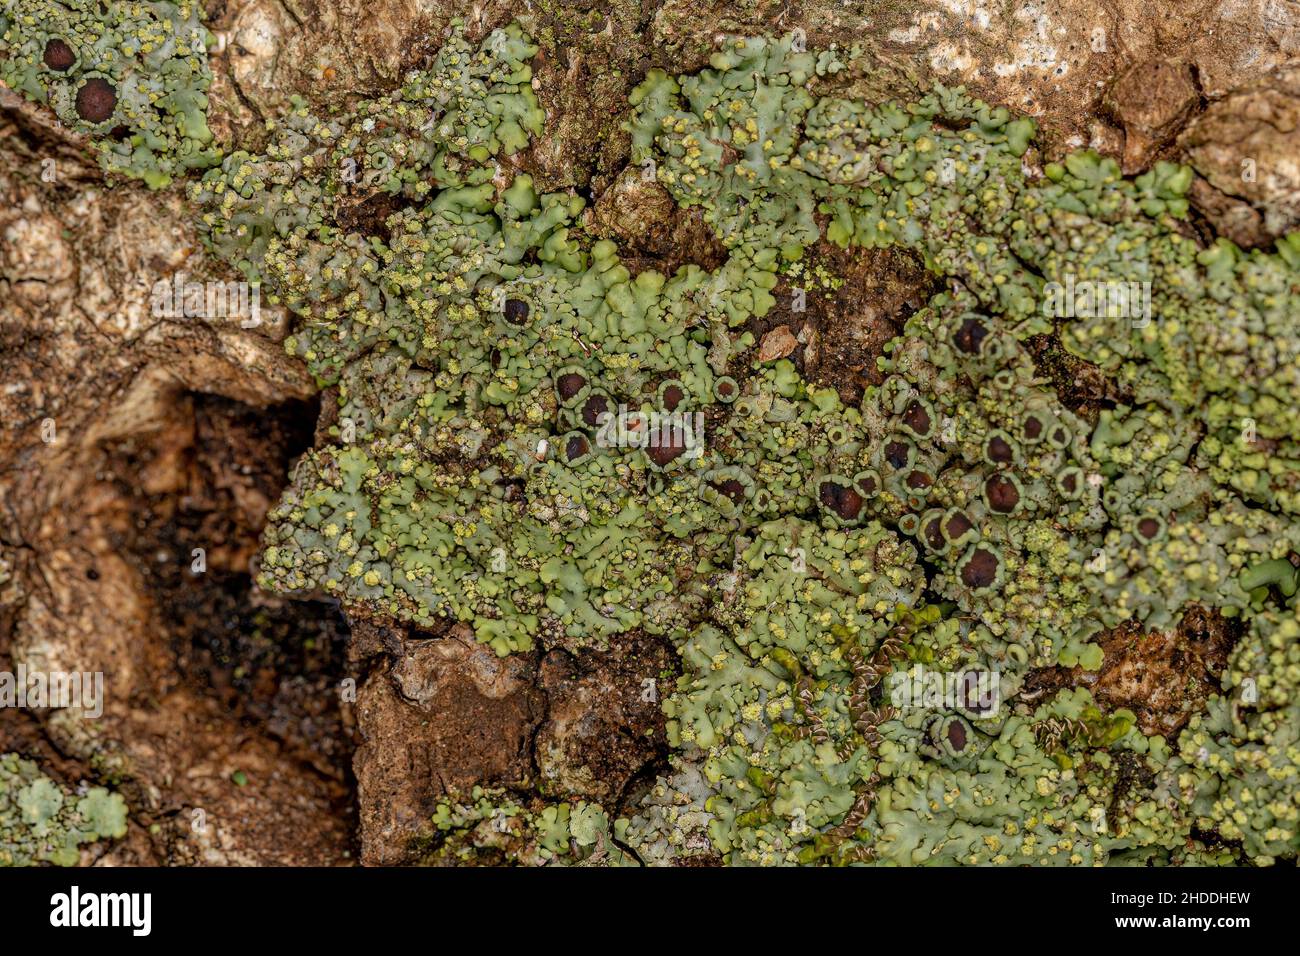 Small Green Lichen texture on a trunk in macro view Stock Photo